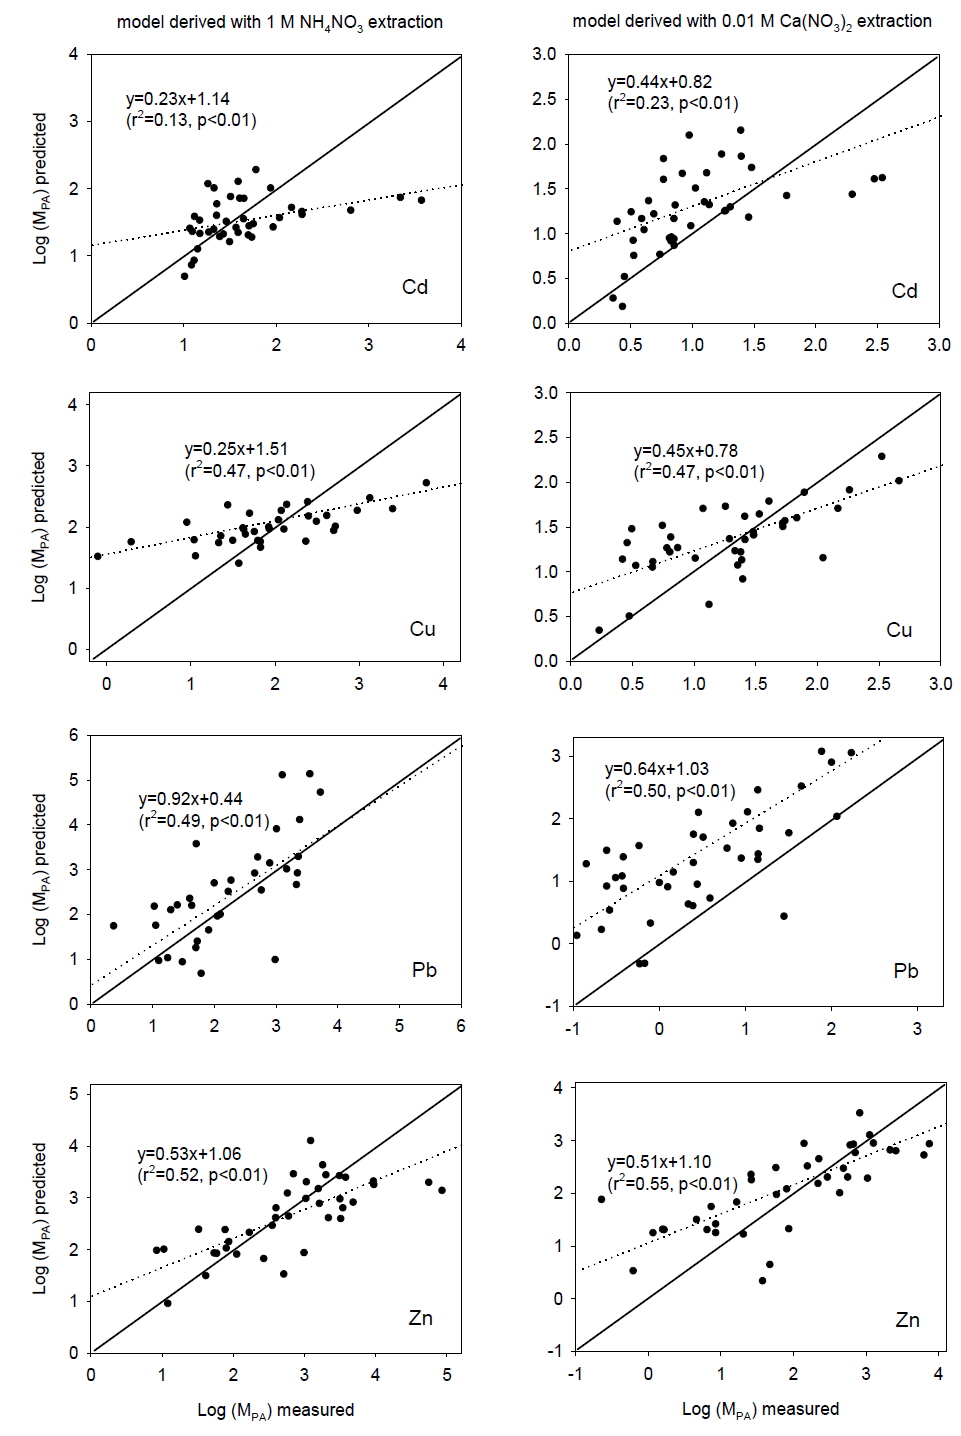 Comparison of measured and estimated phytoavailable metal concentrations in the soil samples for ‘validation data set’ using transfer functions derived in this study (solid line refers to 1:1 fit between measured and estimated values; dotted line refers to linear regression fit between measured and estimated values)